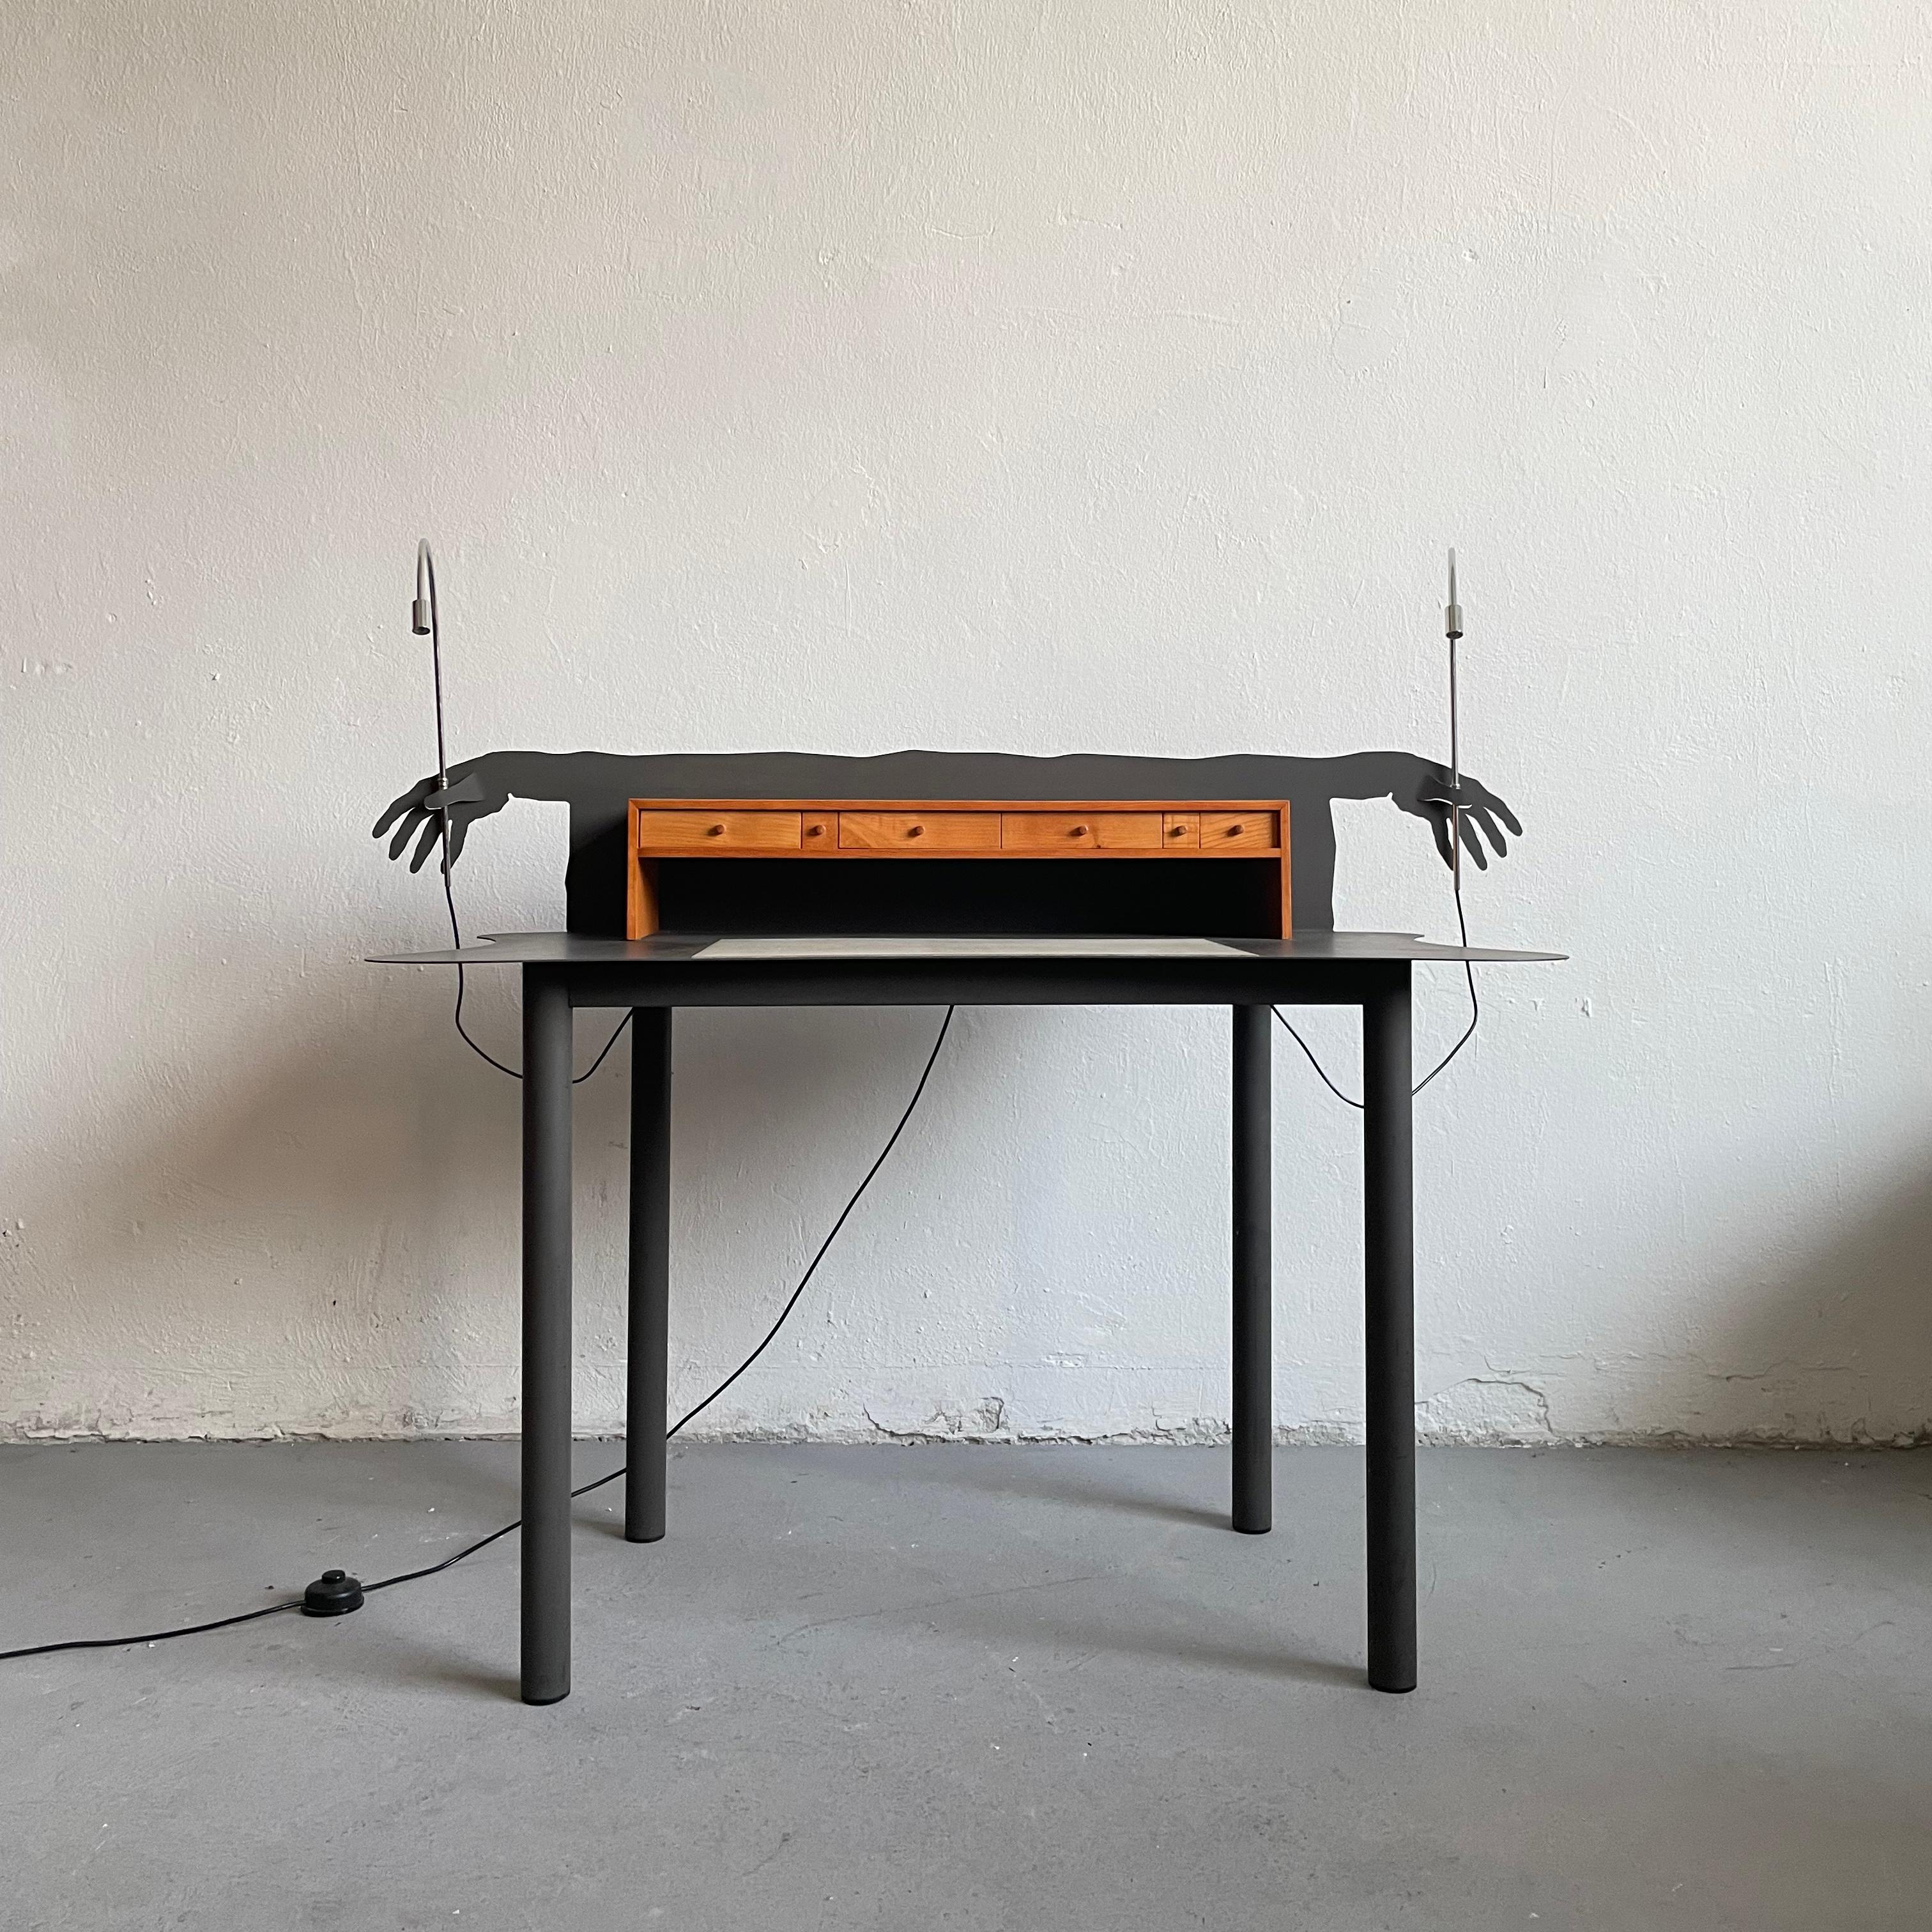 Postmodern anthropomorphic form secretary desk 'Entremanos' made of cut steel and wood

Stunning avant-garde sculptural surrealist design by Spanish artist Andrés Nagel for Spanish furniture maker Akaba, 1988 

The desk is in good vintage condition,